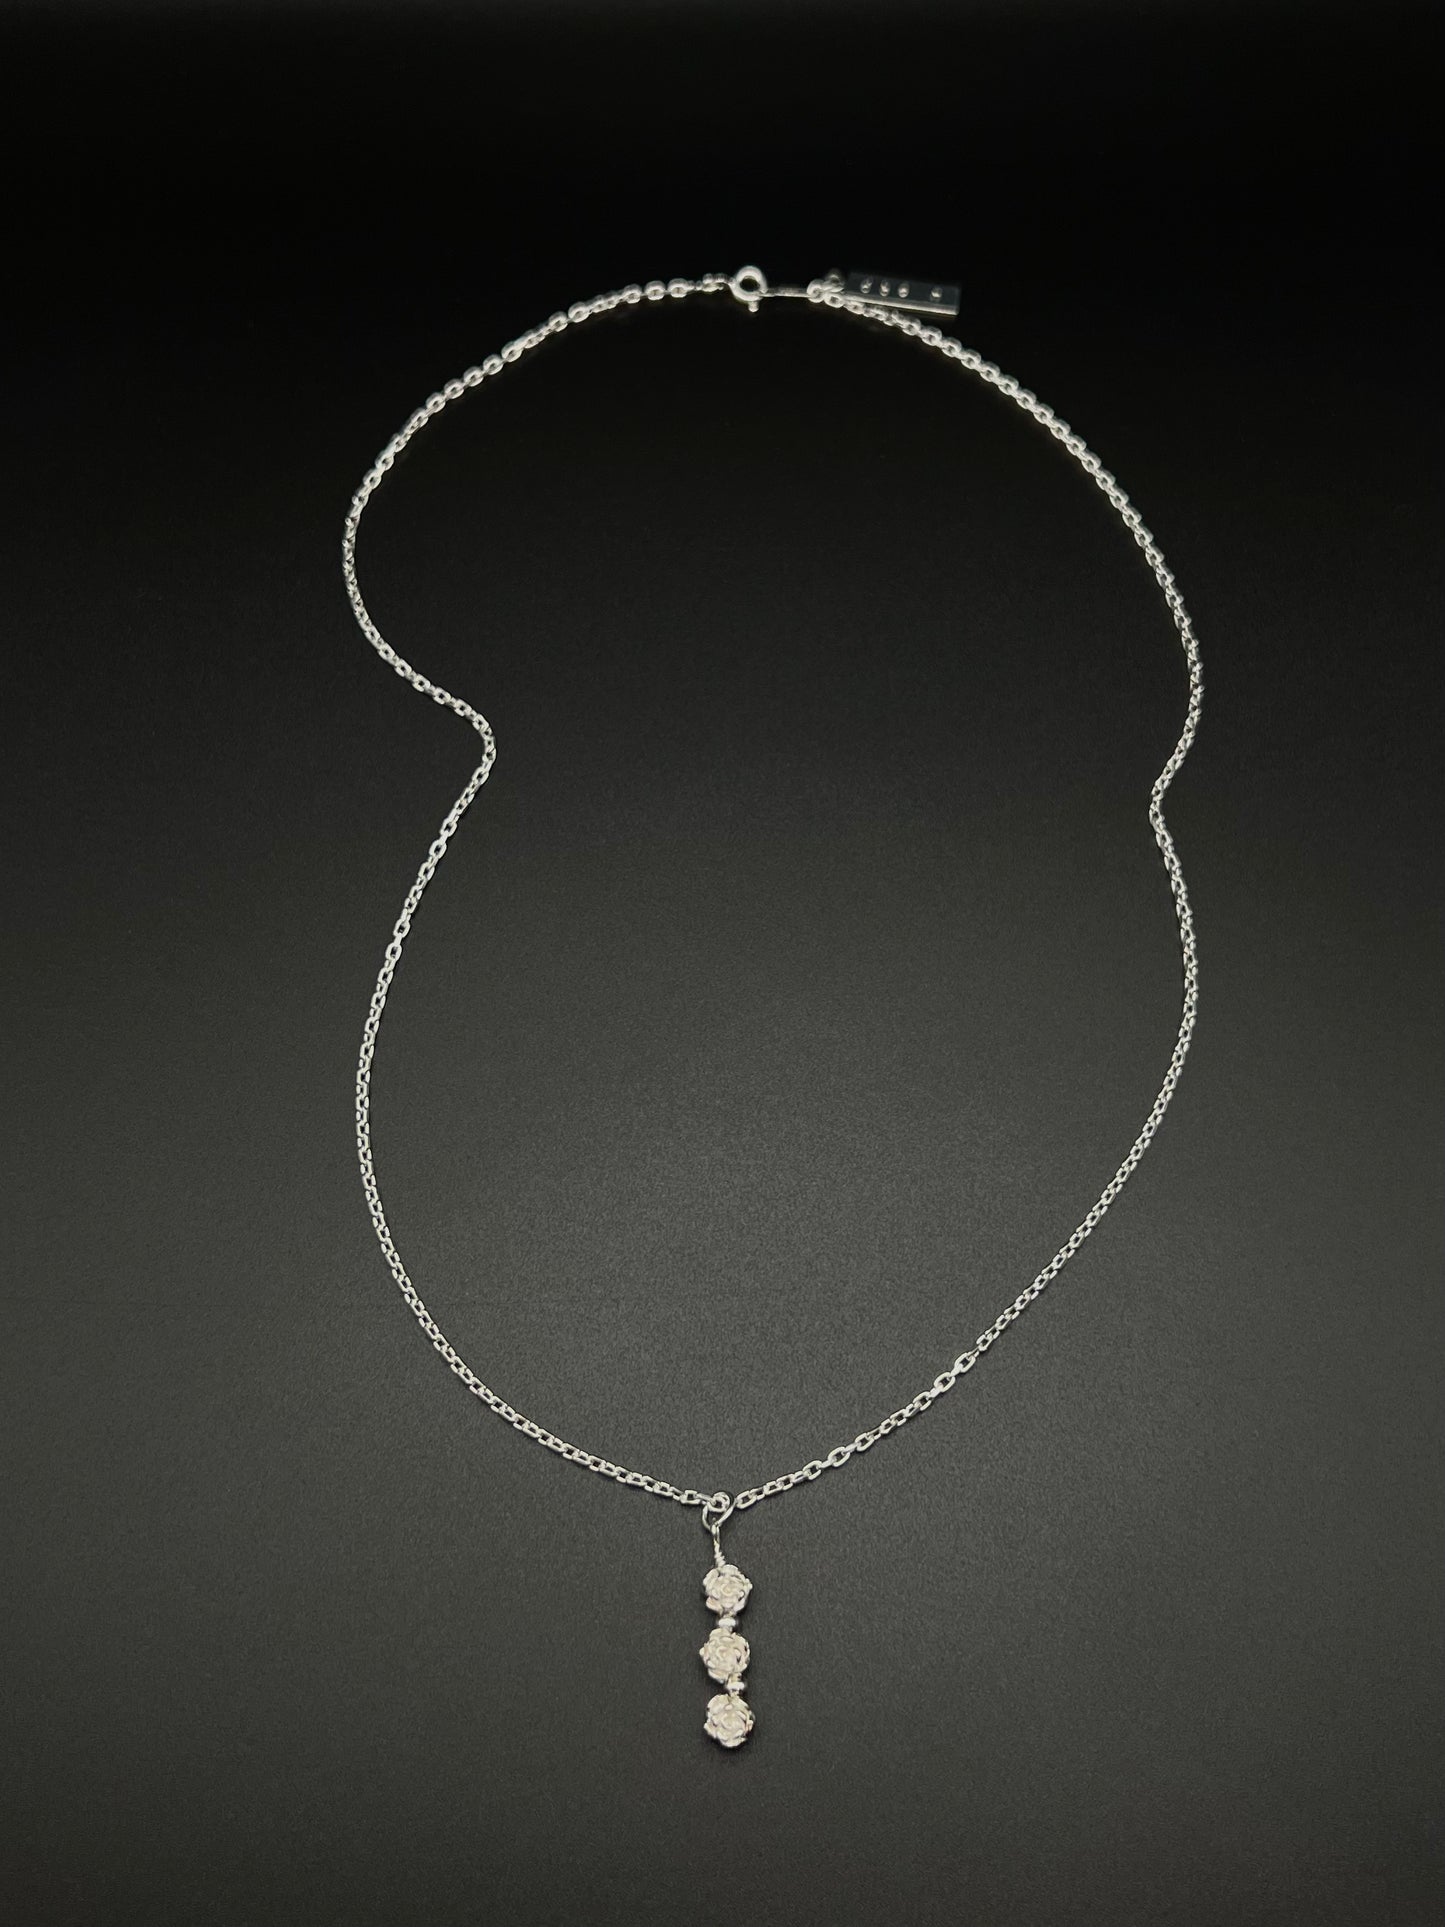 3Rose necklace -silver925